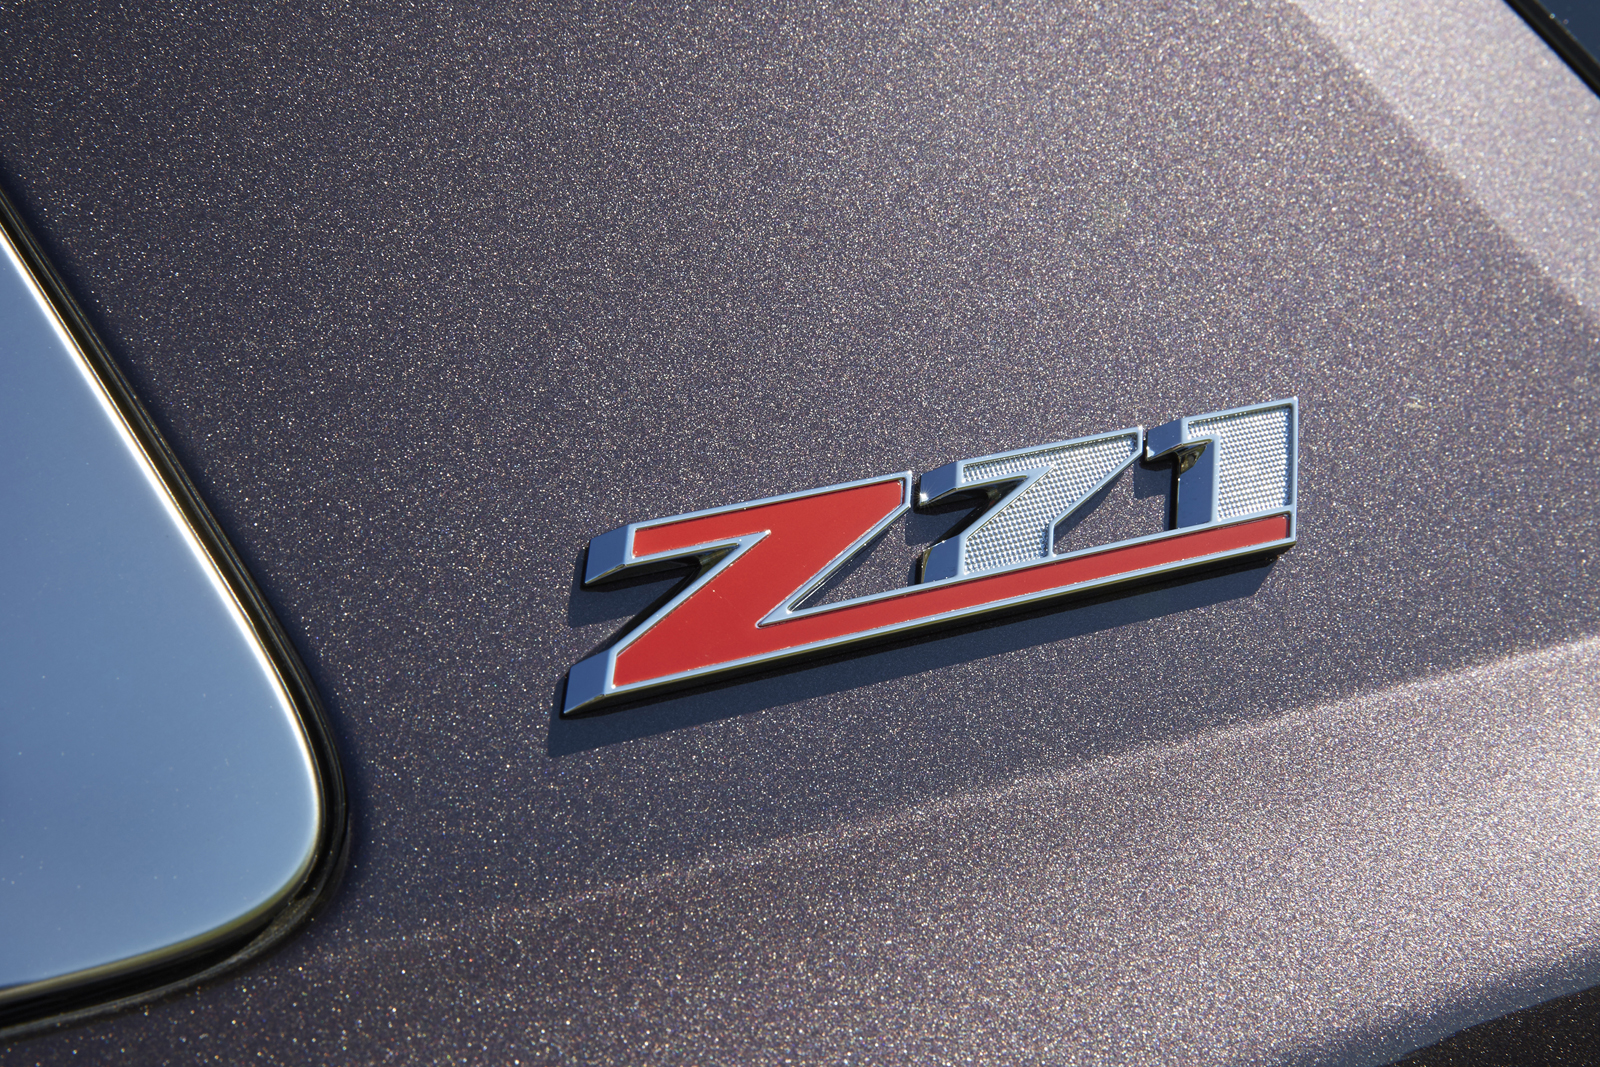 Chevrolet announced today plans for the 2015 Tahoe and Suburban Z71